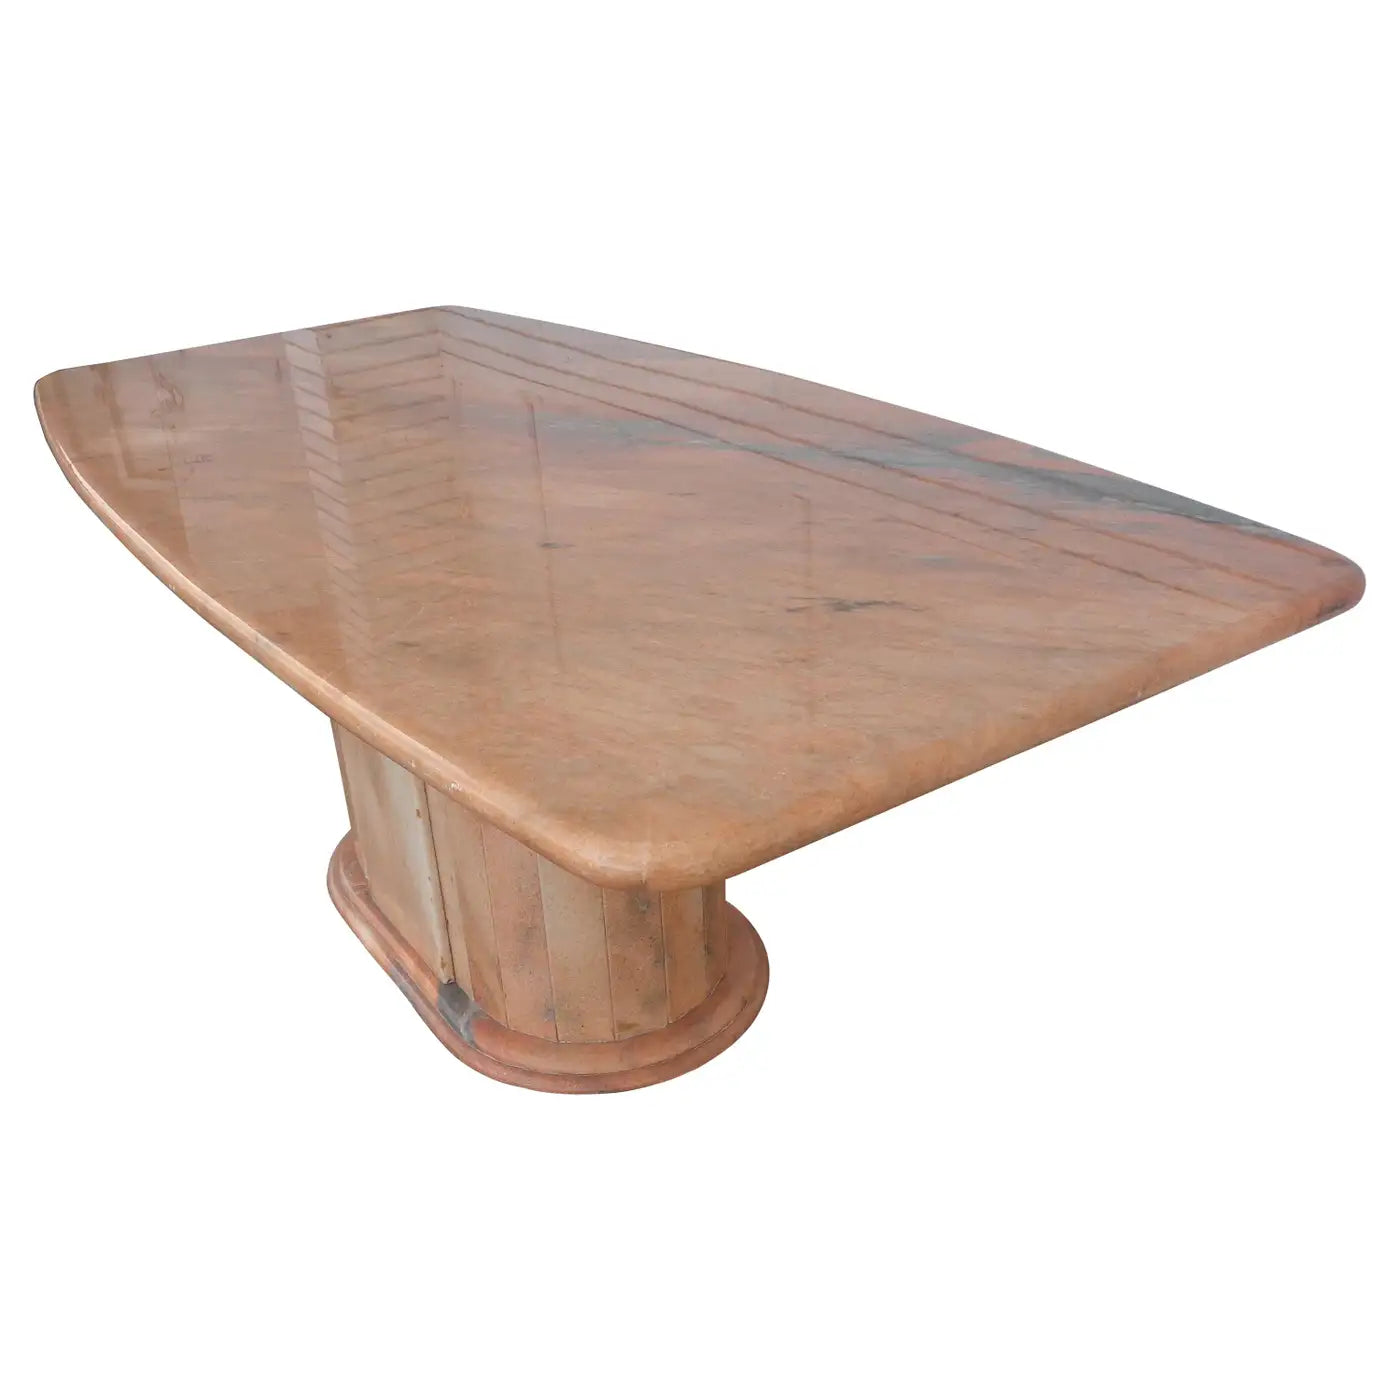 78″ Marble Table